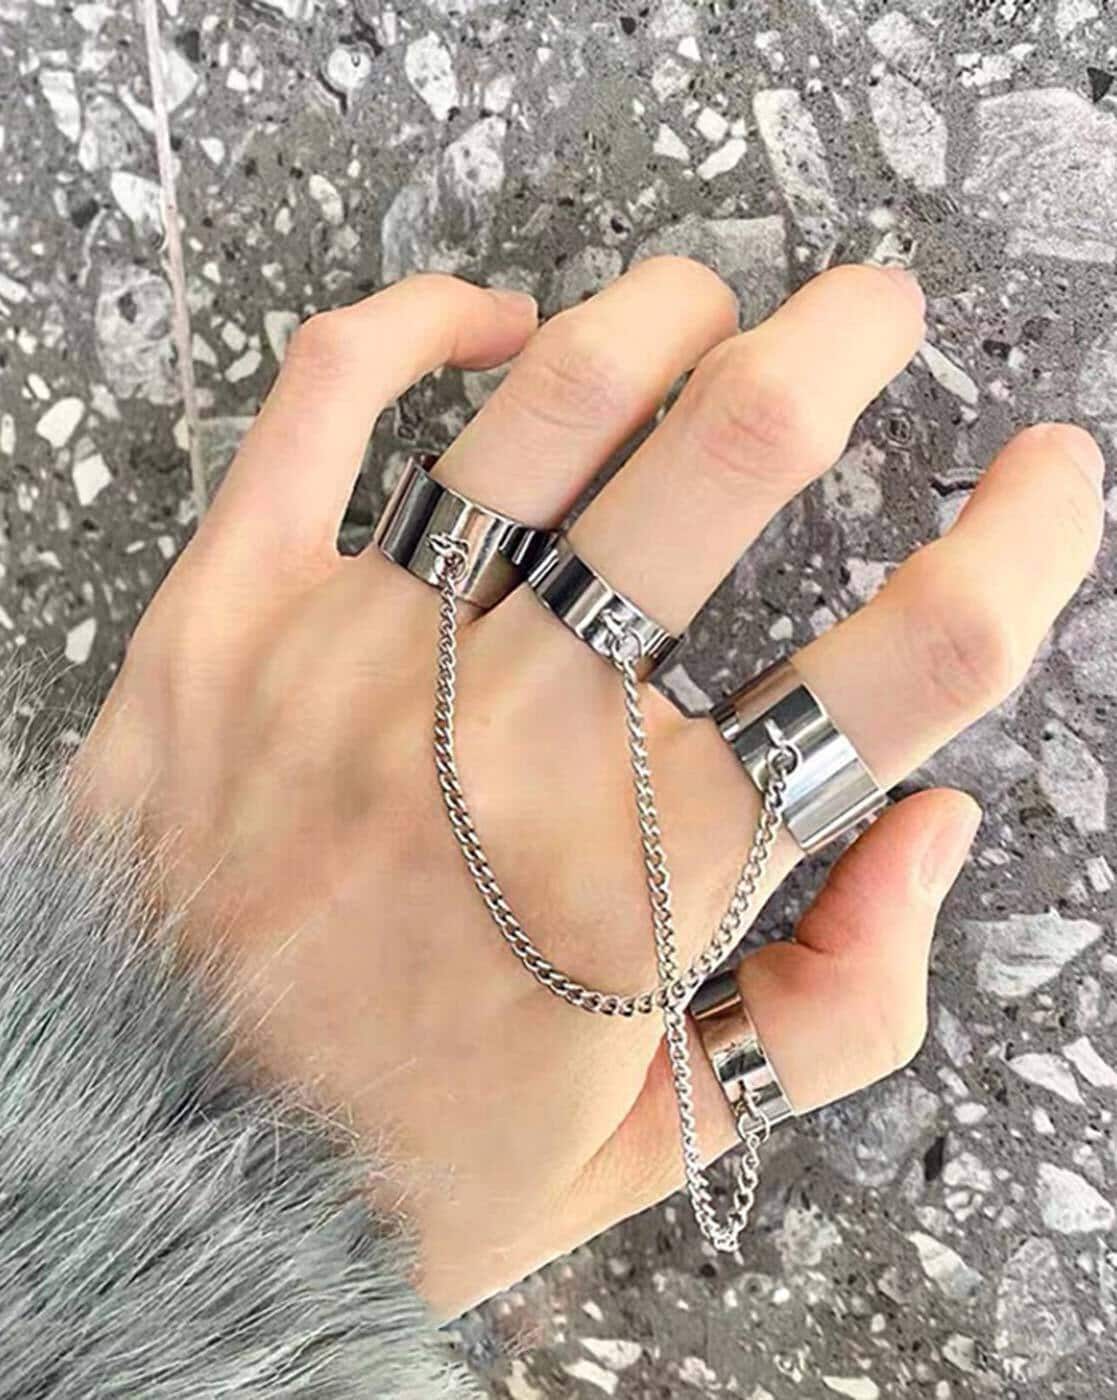 Snake Rings Reptile 4 Finger Ring Silver Black Tone Wide Fun Gothic Emo  Goth | eBay